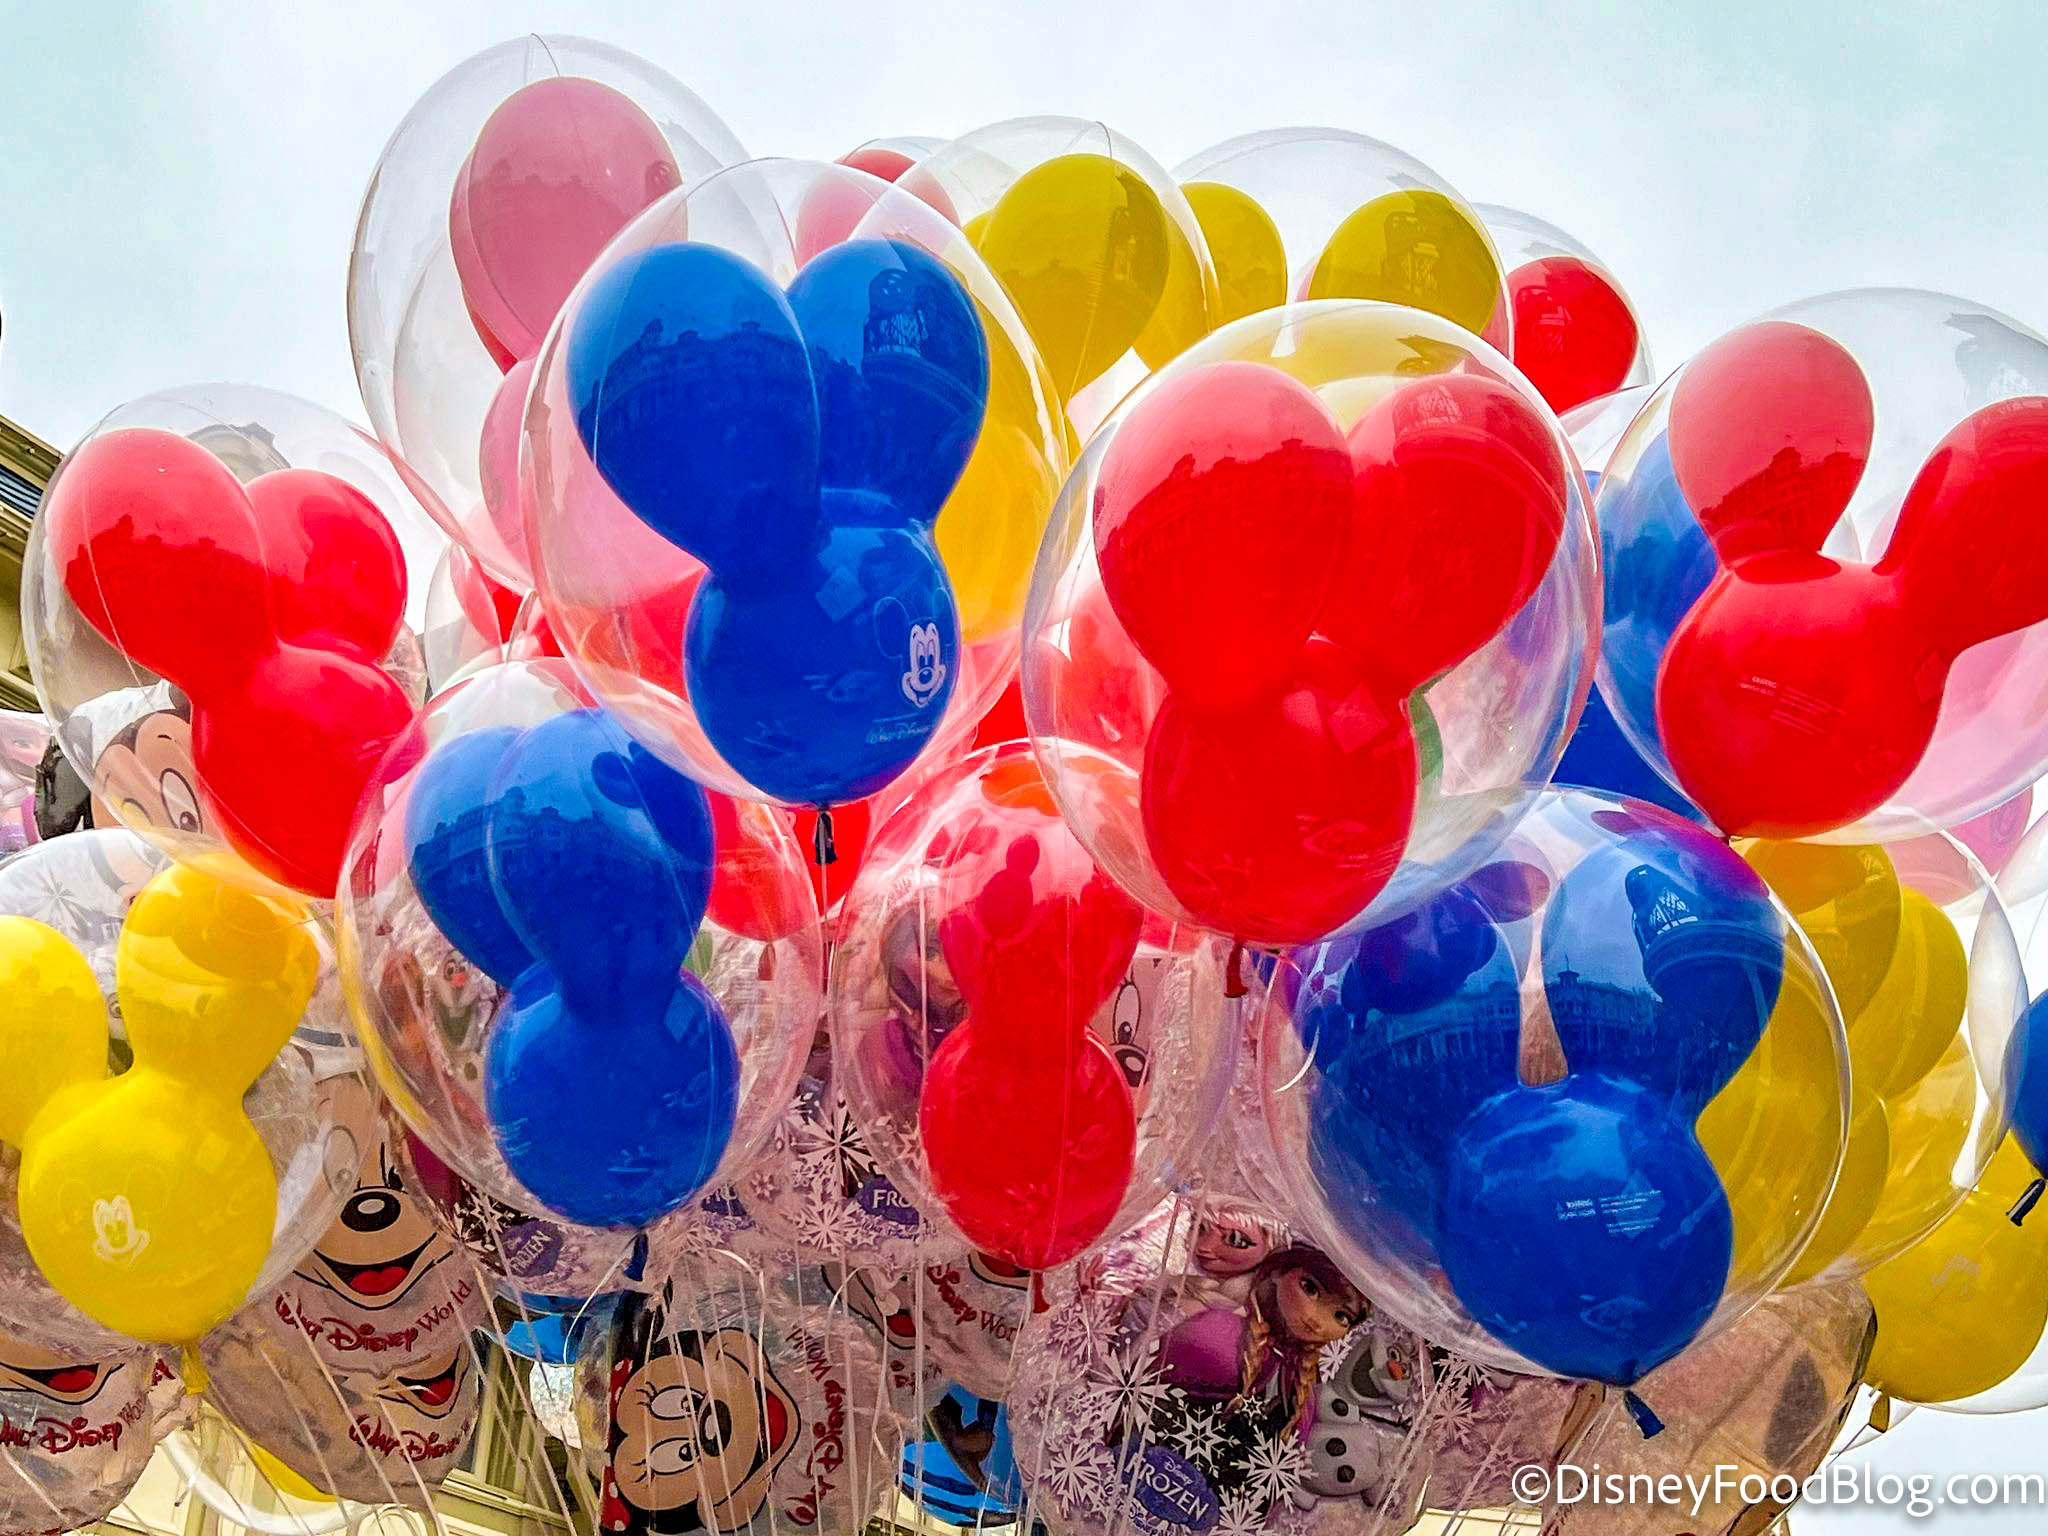 VIDEO: Watch One of Disney's Famous Balloons Be Made